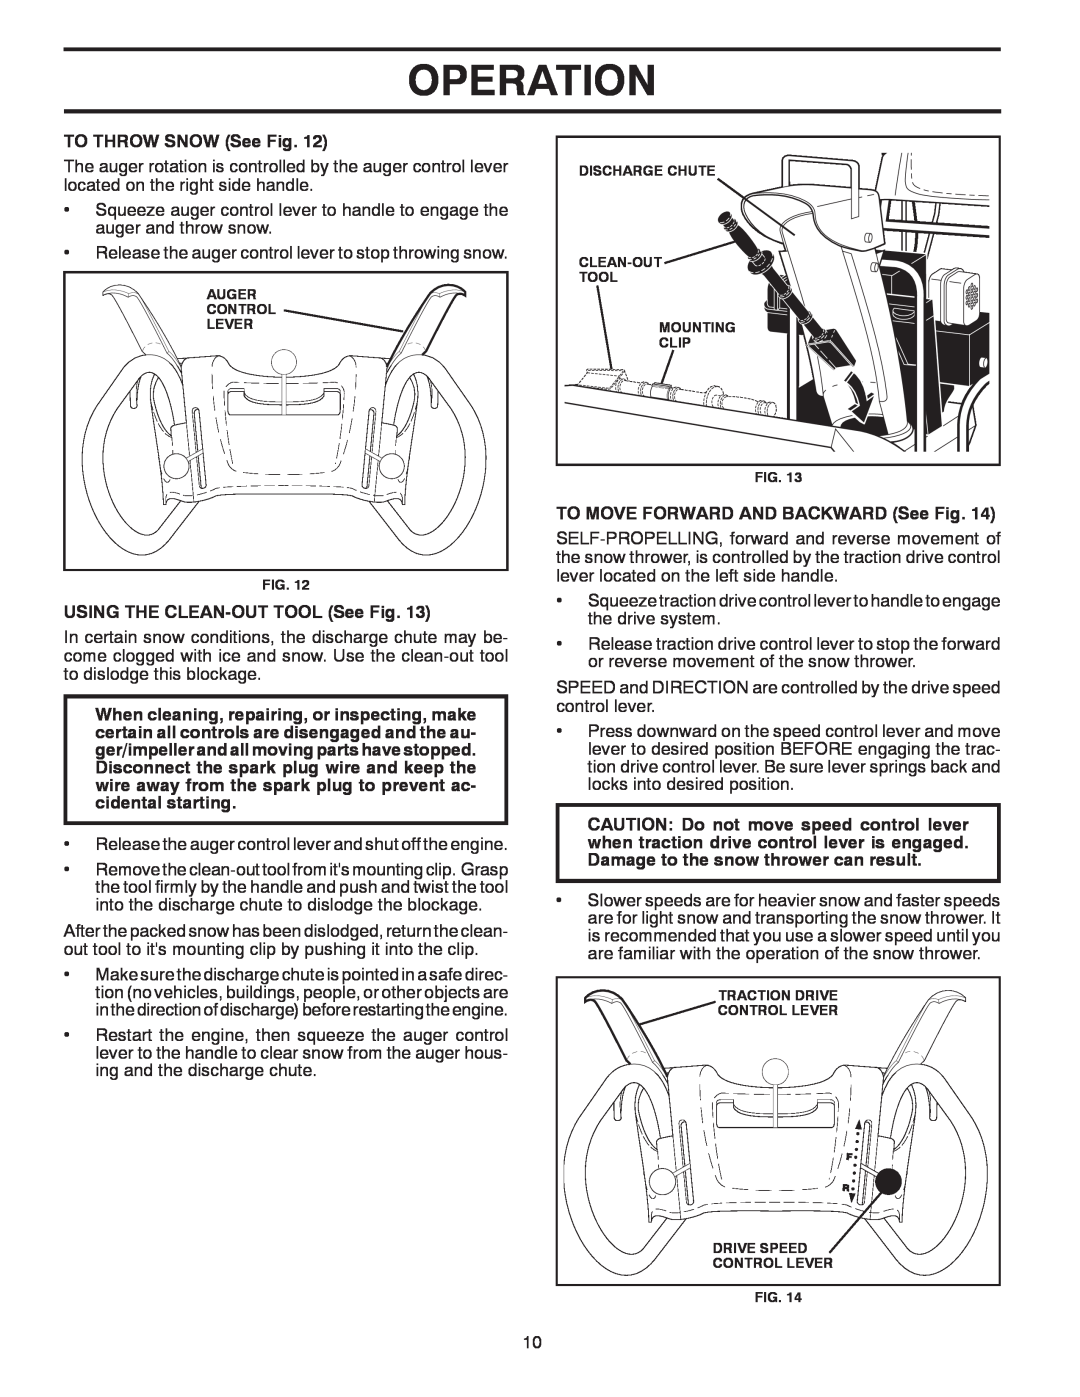 Poulan 96194000504 owner manual Operation, TO THROW SNOW See Fig, USING THE CLEAN-OUT TOOL See Fig 